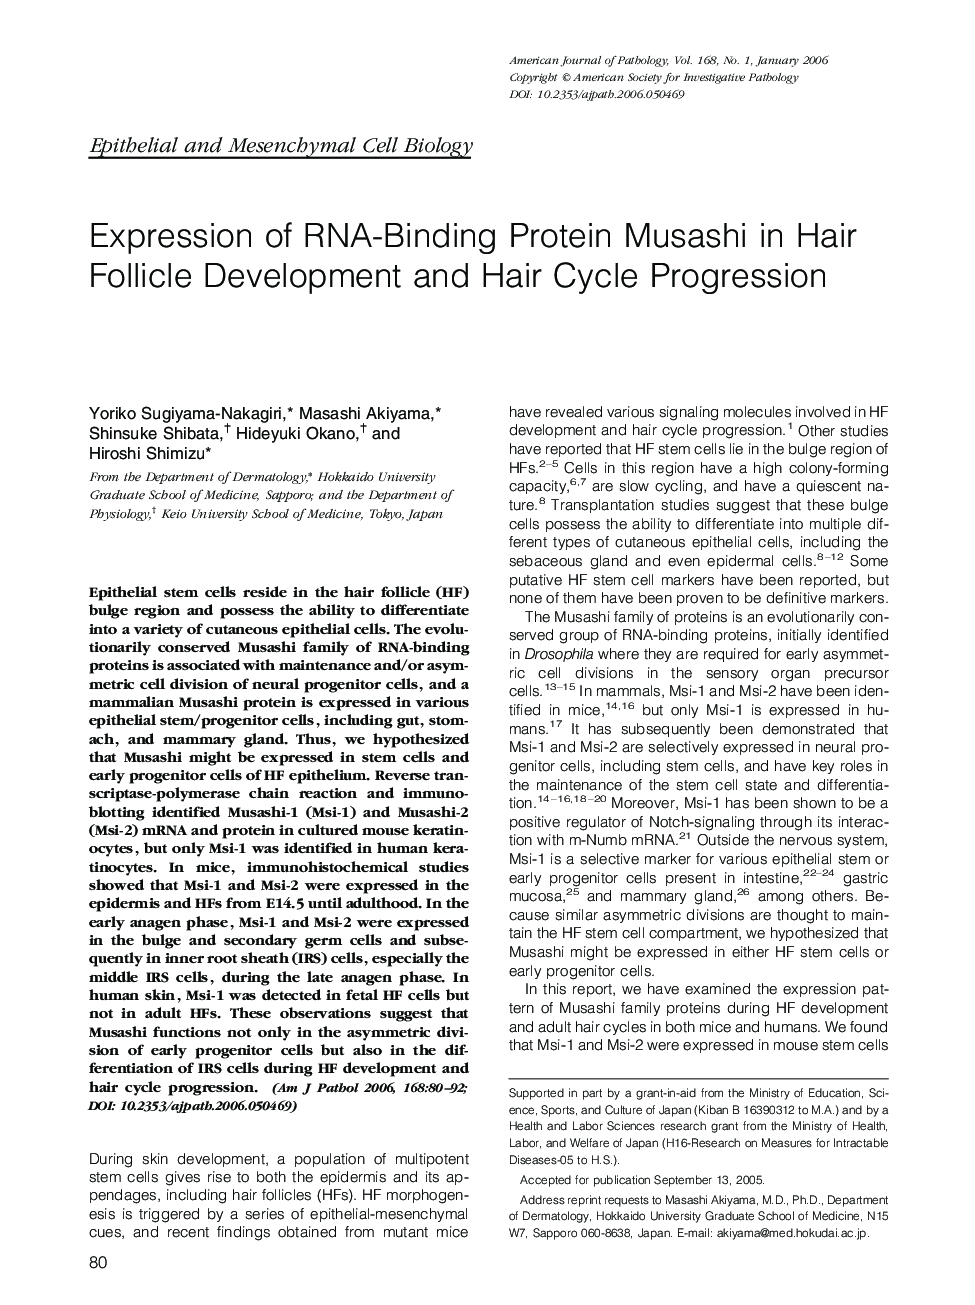 Expression of RNA-Binding Protein Musashi in Hair Follicle Development and Hair Cycle Progression